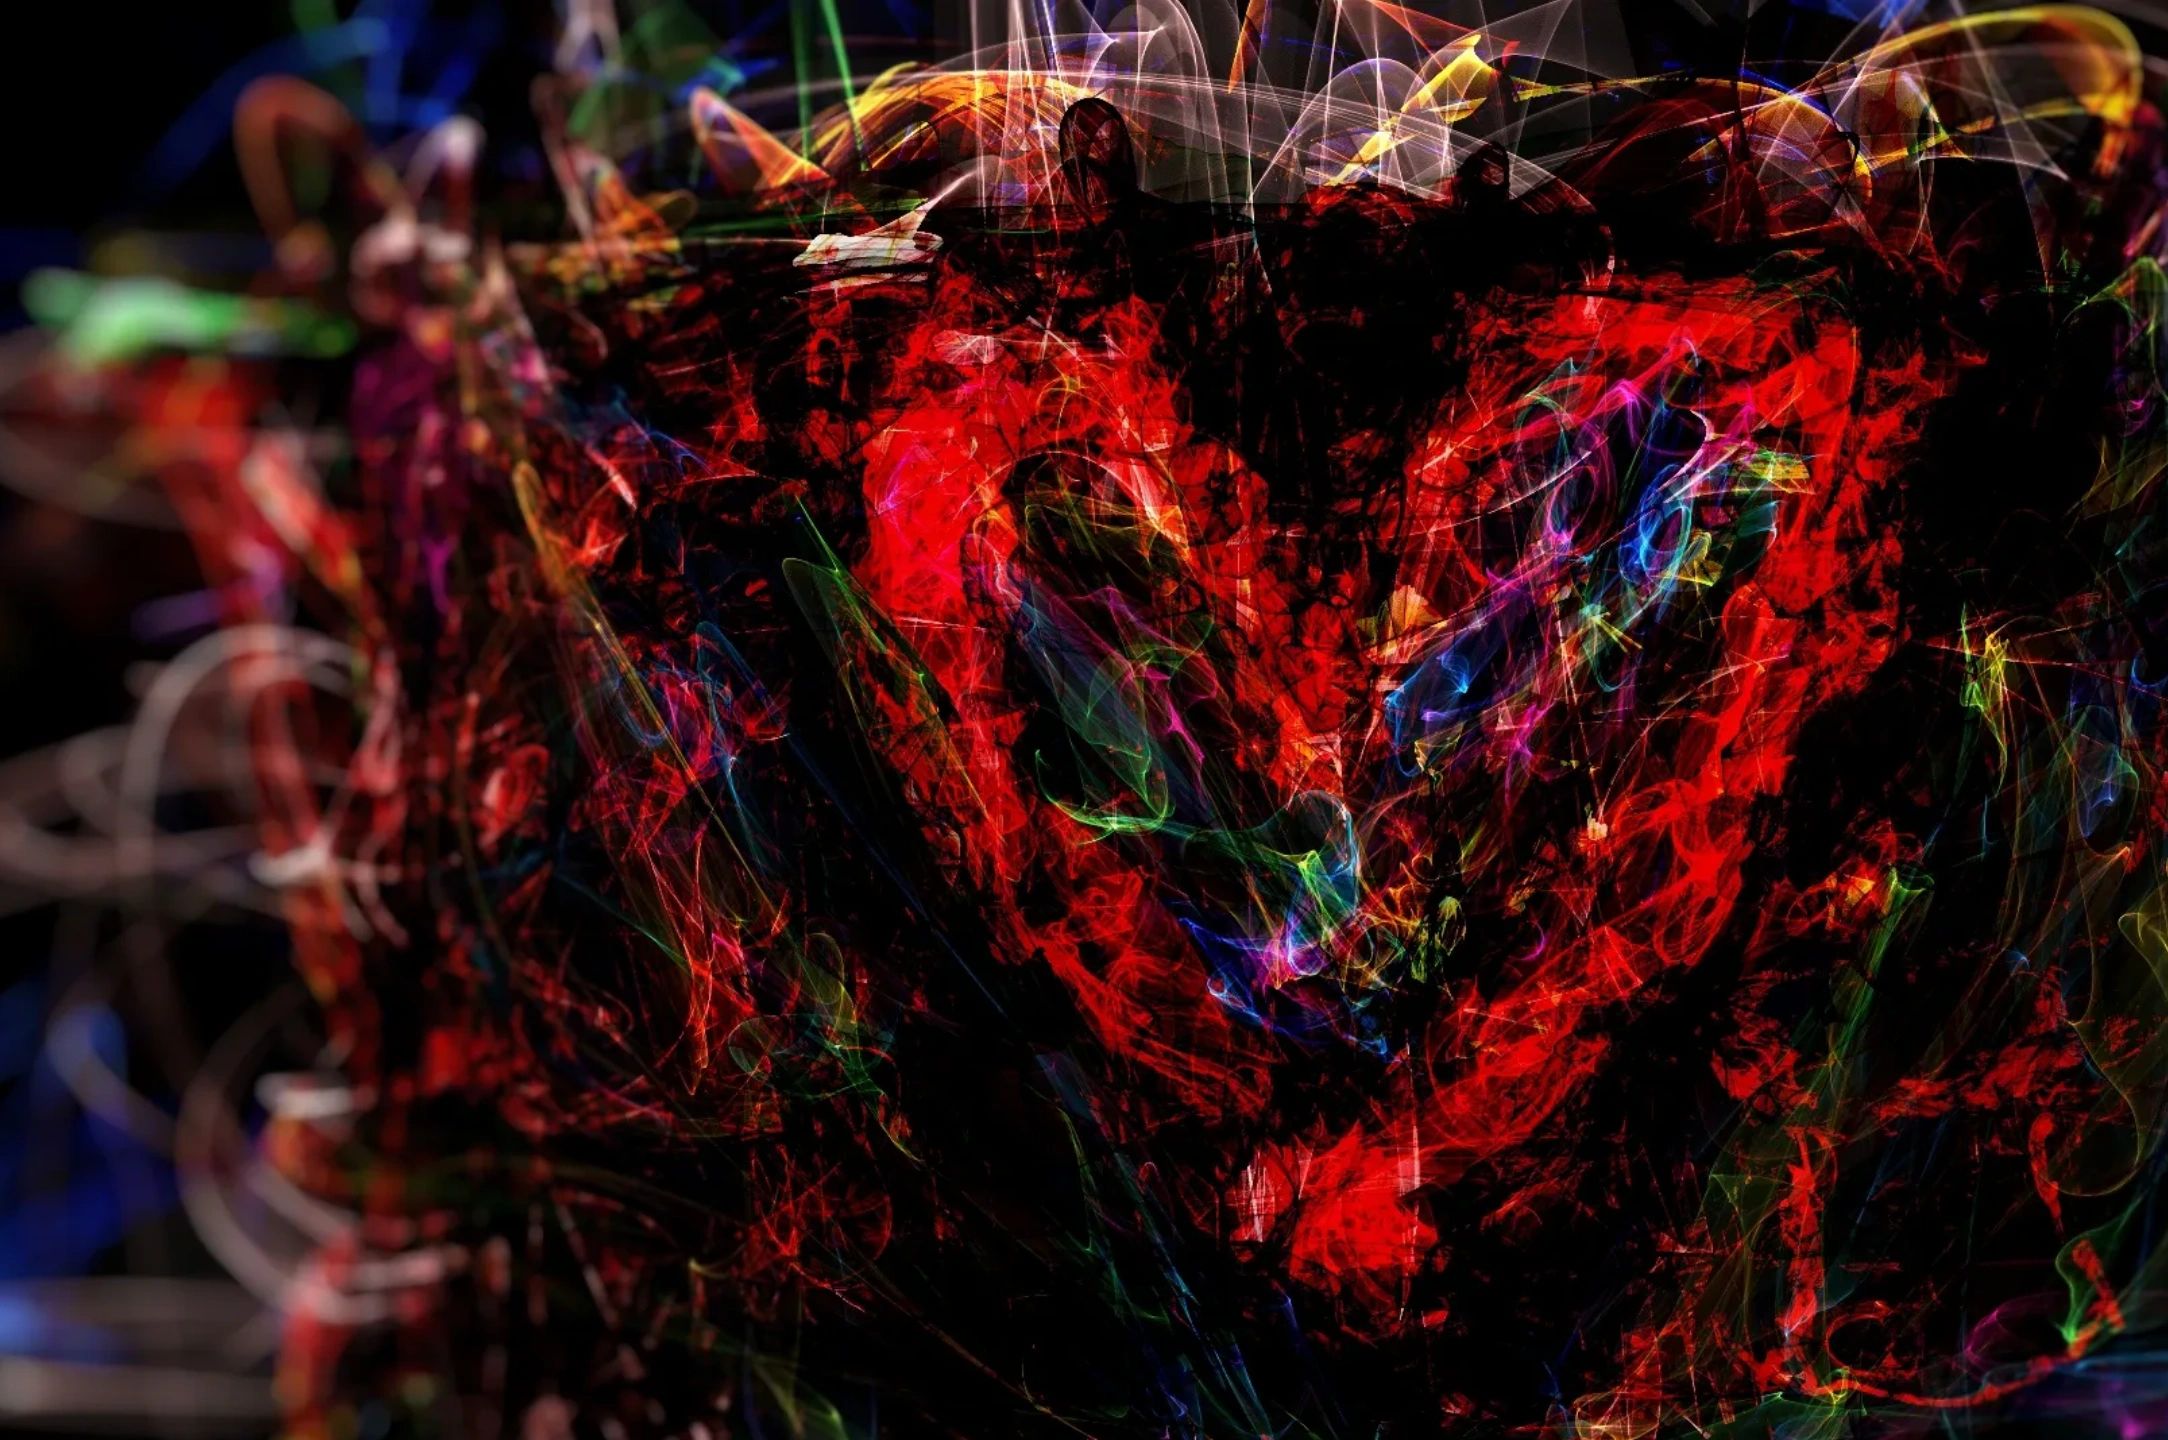 A heart surrounded by colors
